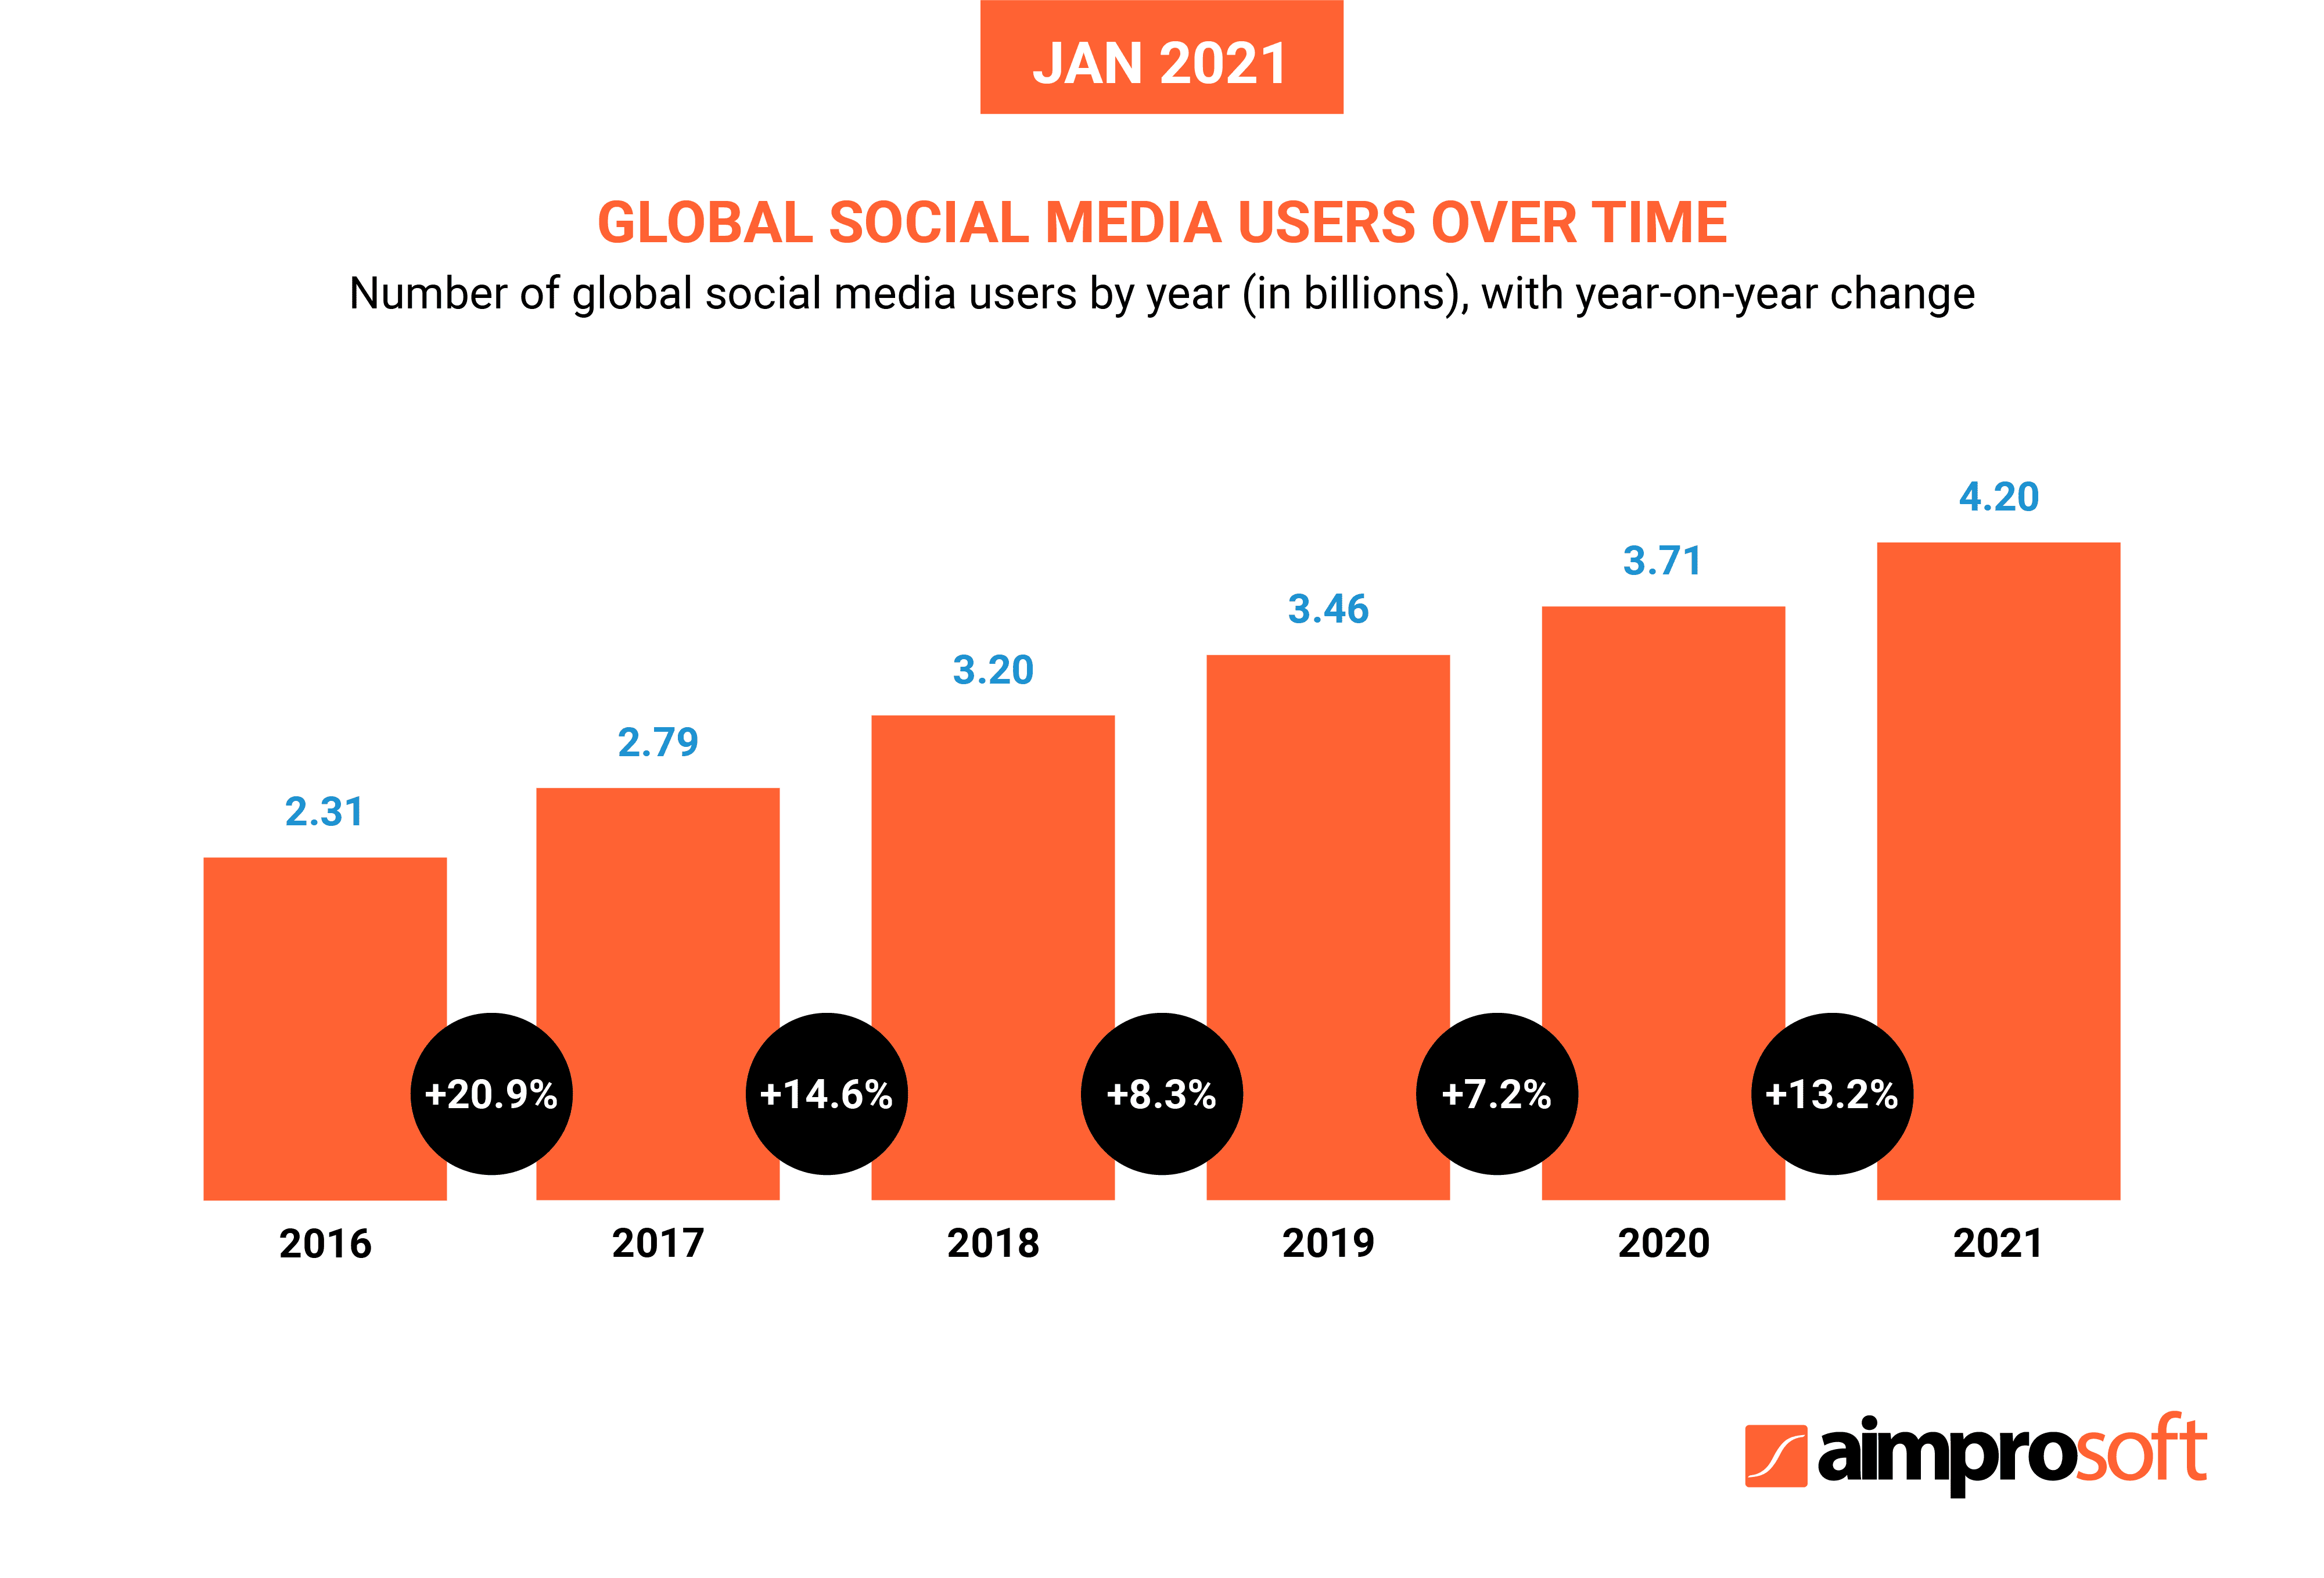 Global social media users over time